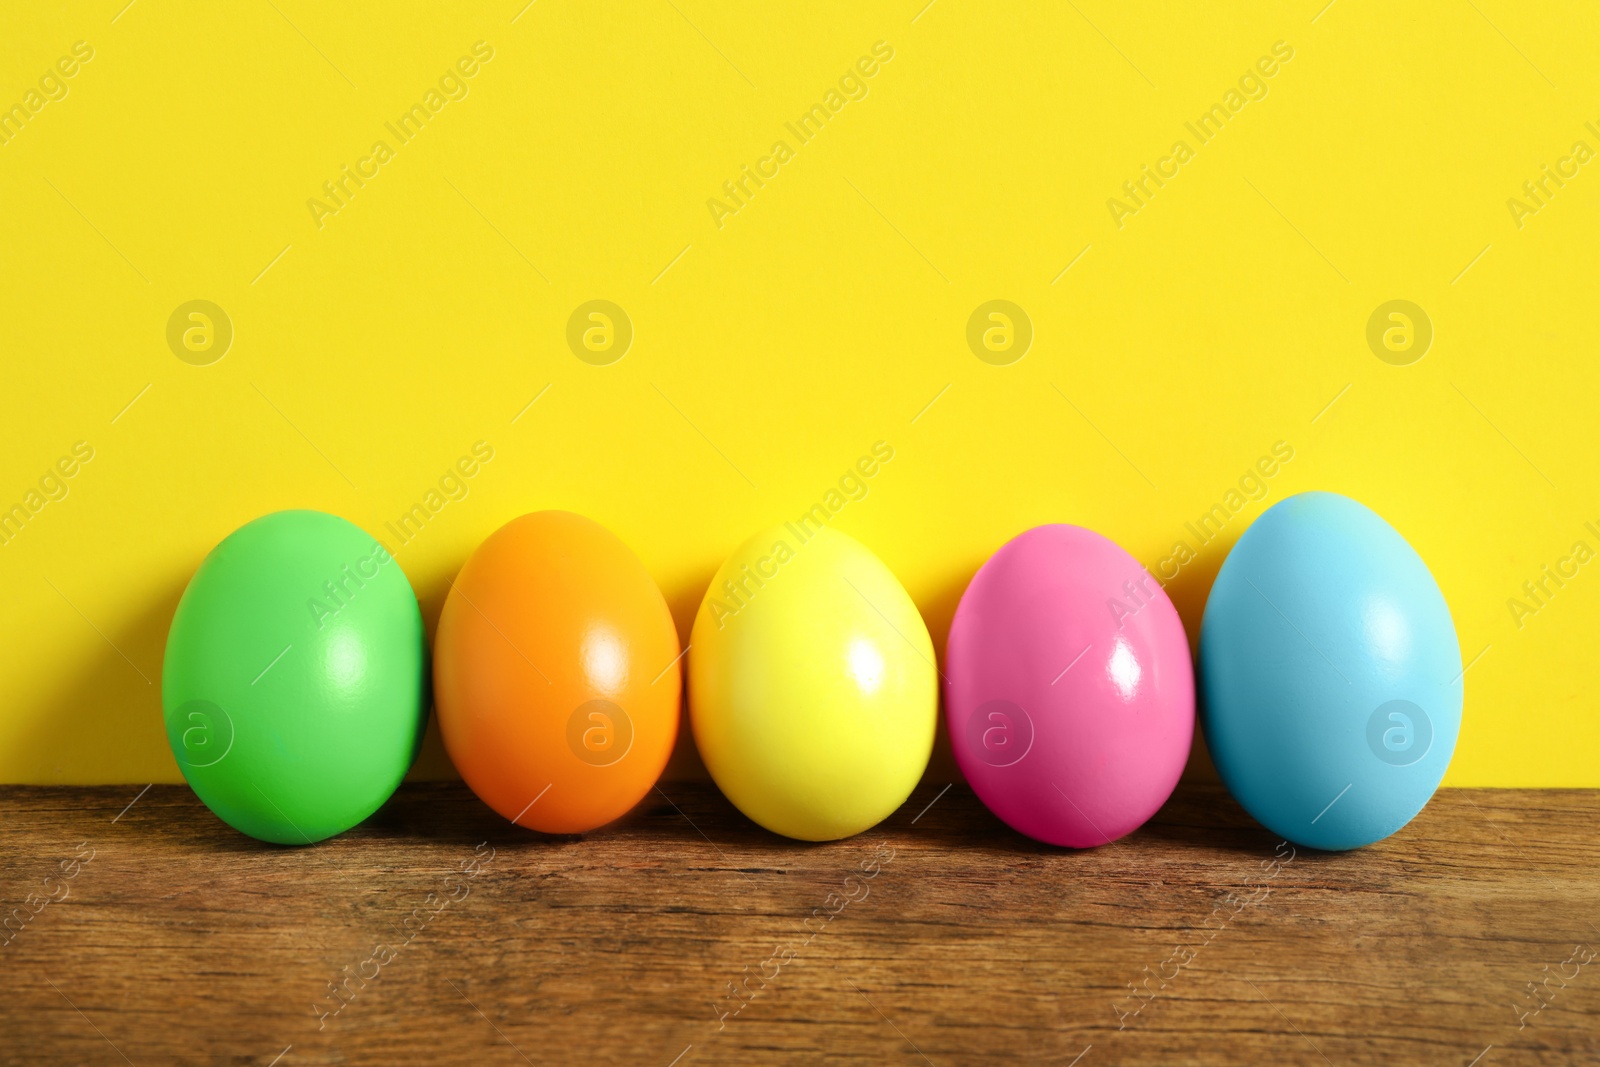 Photo of Easter eggs on wooden table against yellow background